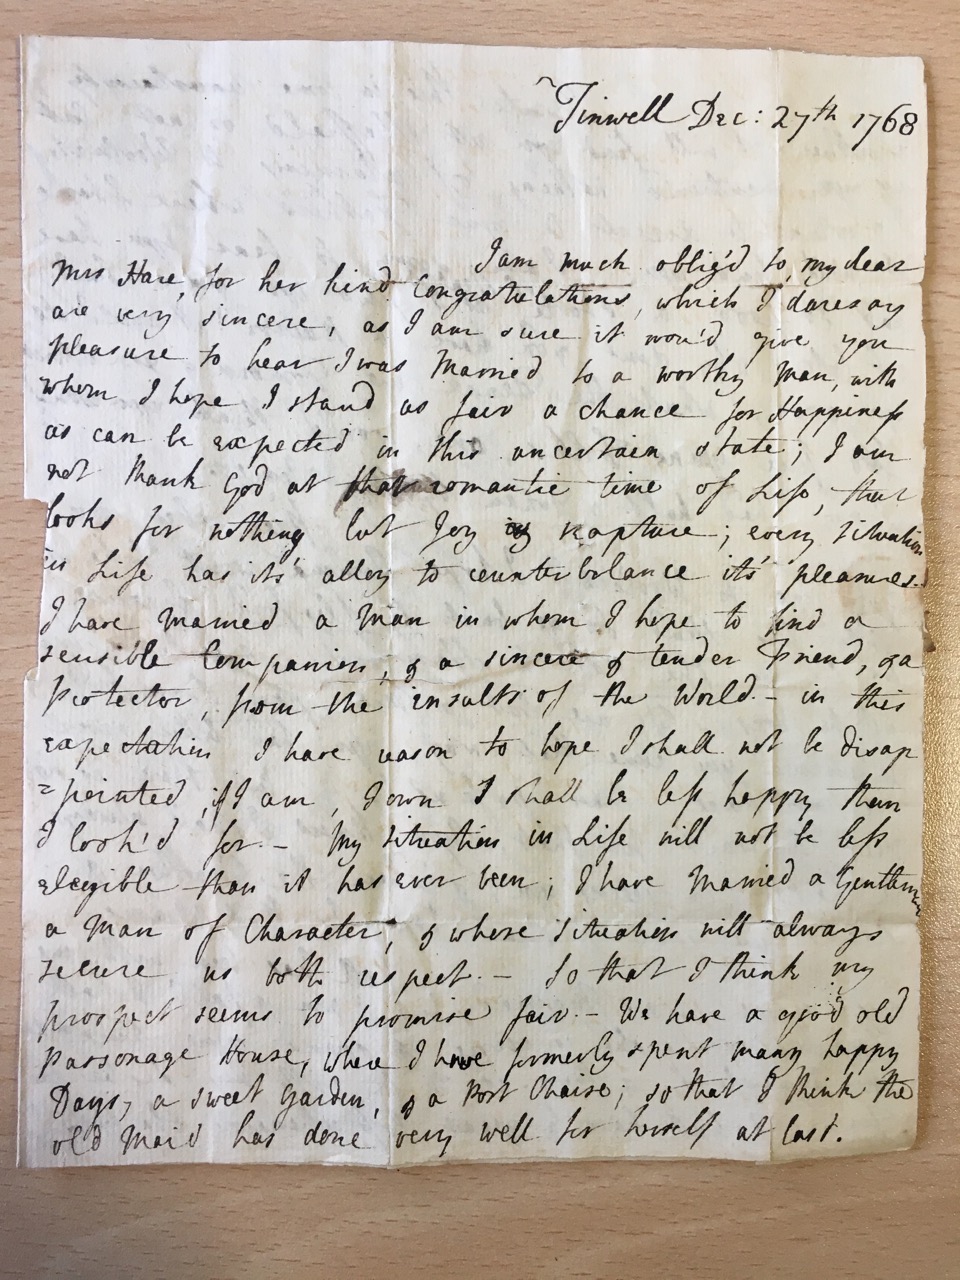 Image #1 of letter: S[ally] Digby and I Collier to Ann Hare, 27 December 1768